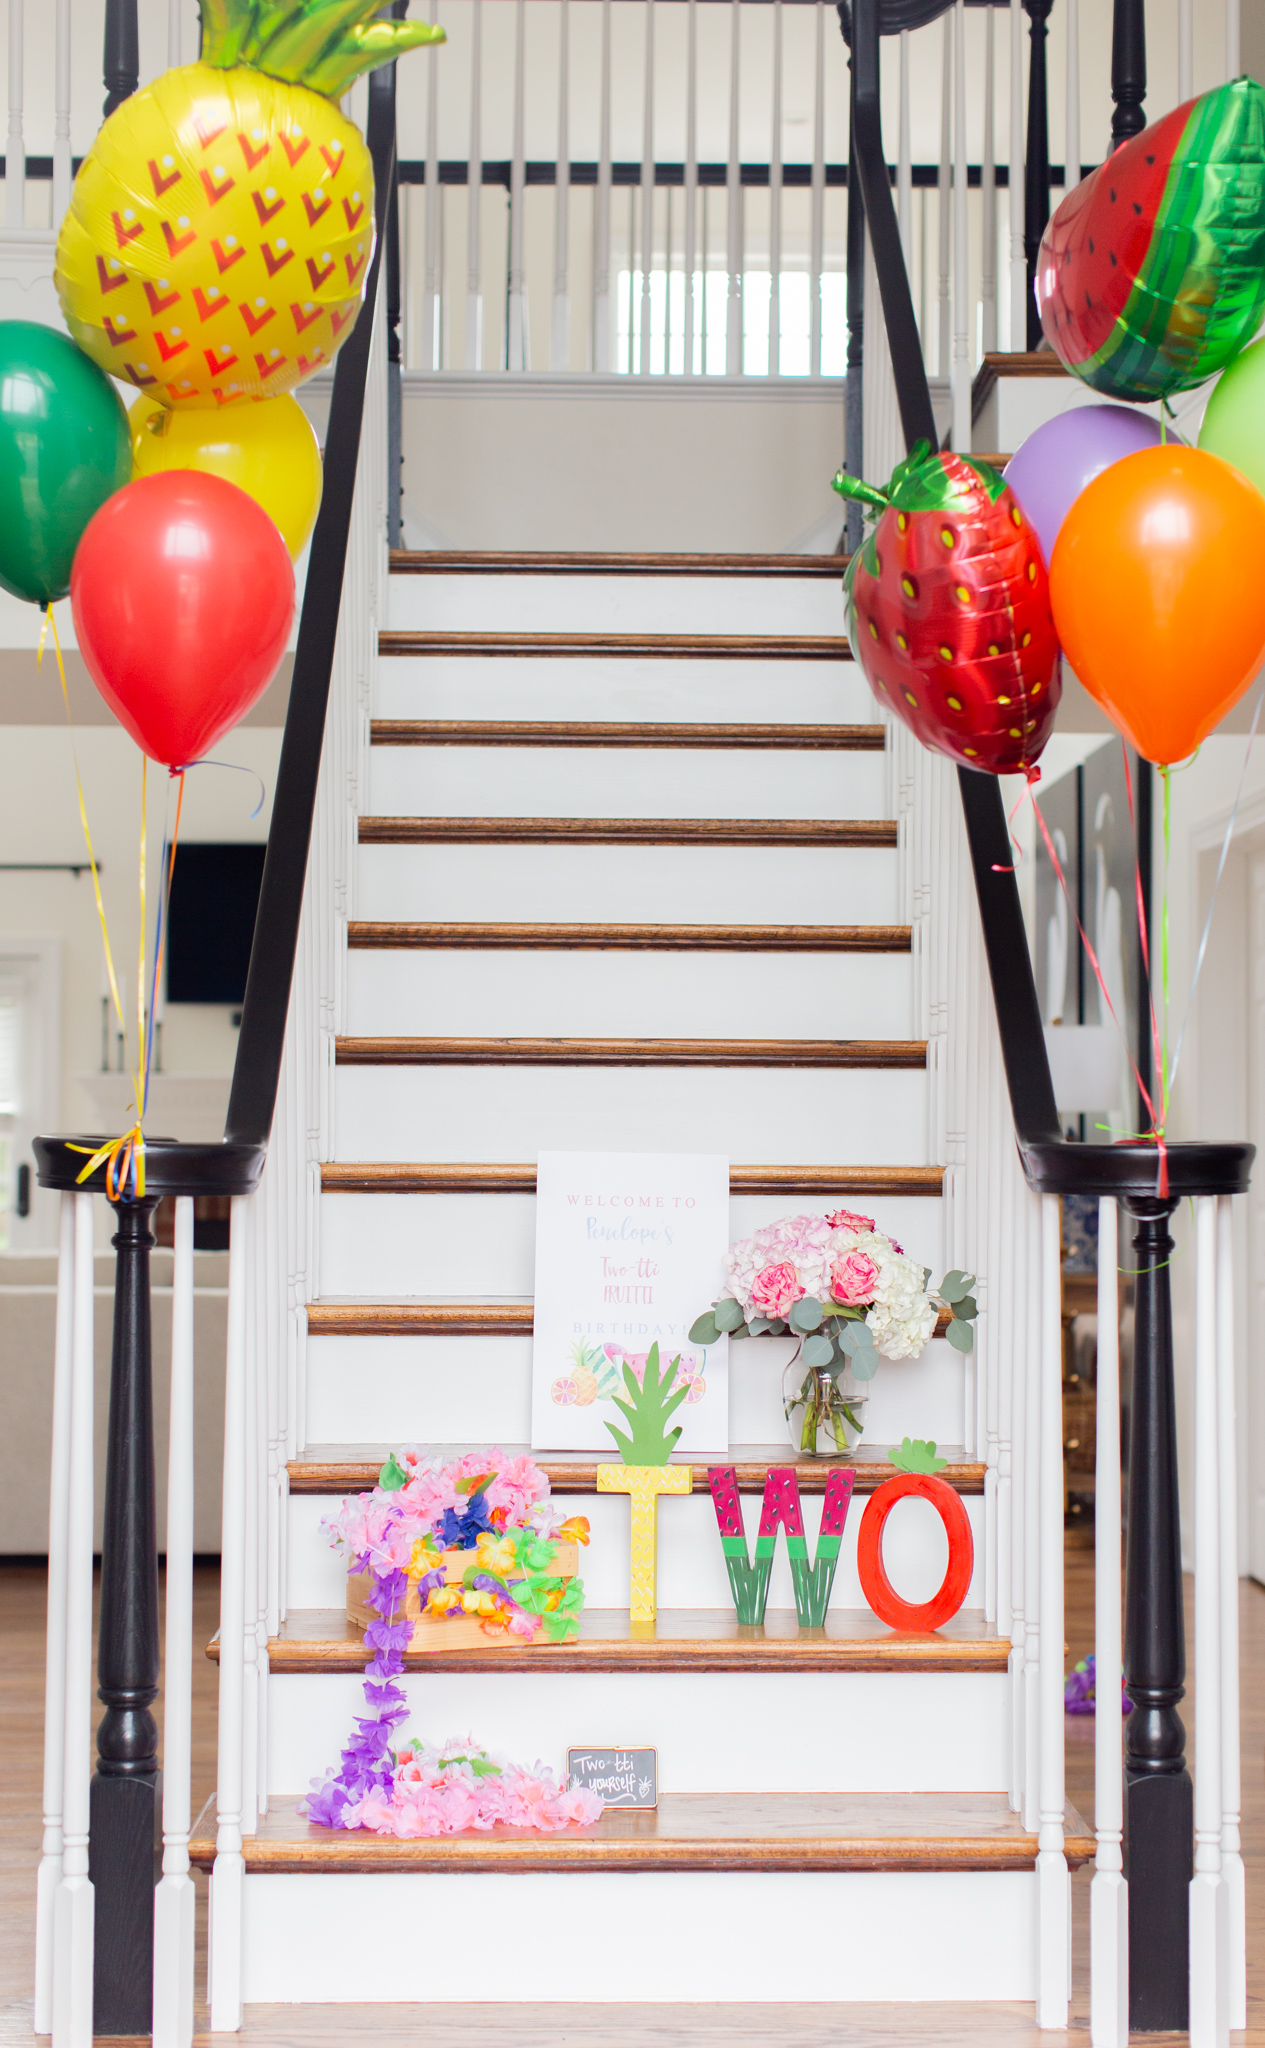 2nd Birthday Party Ideas by popular Ohio lifestyle blog, Coffee Beans and Bobby Pins: image of a staircase decorated with helium filled Mylar fruit balloons, regular helium filled balloons, fruit painted letters that spell out the number two, flower leis, and a floral arrangement of pink and white flowers.  